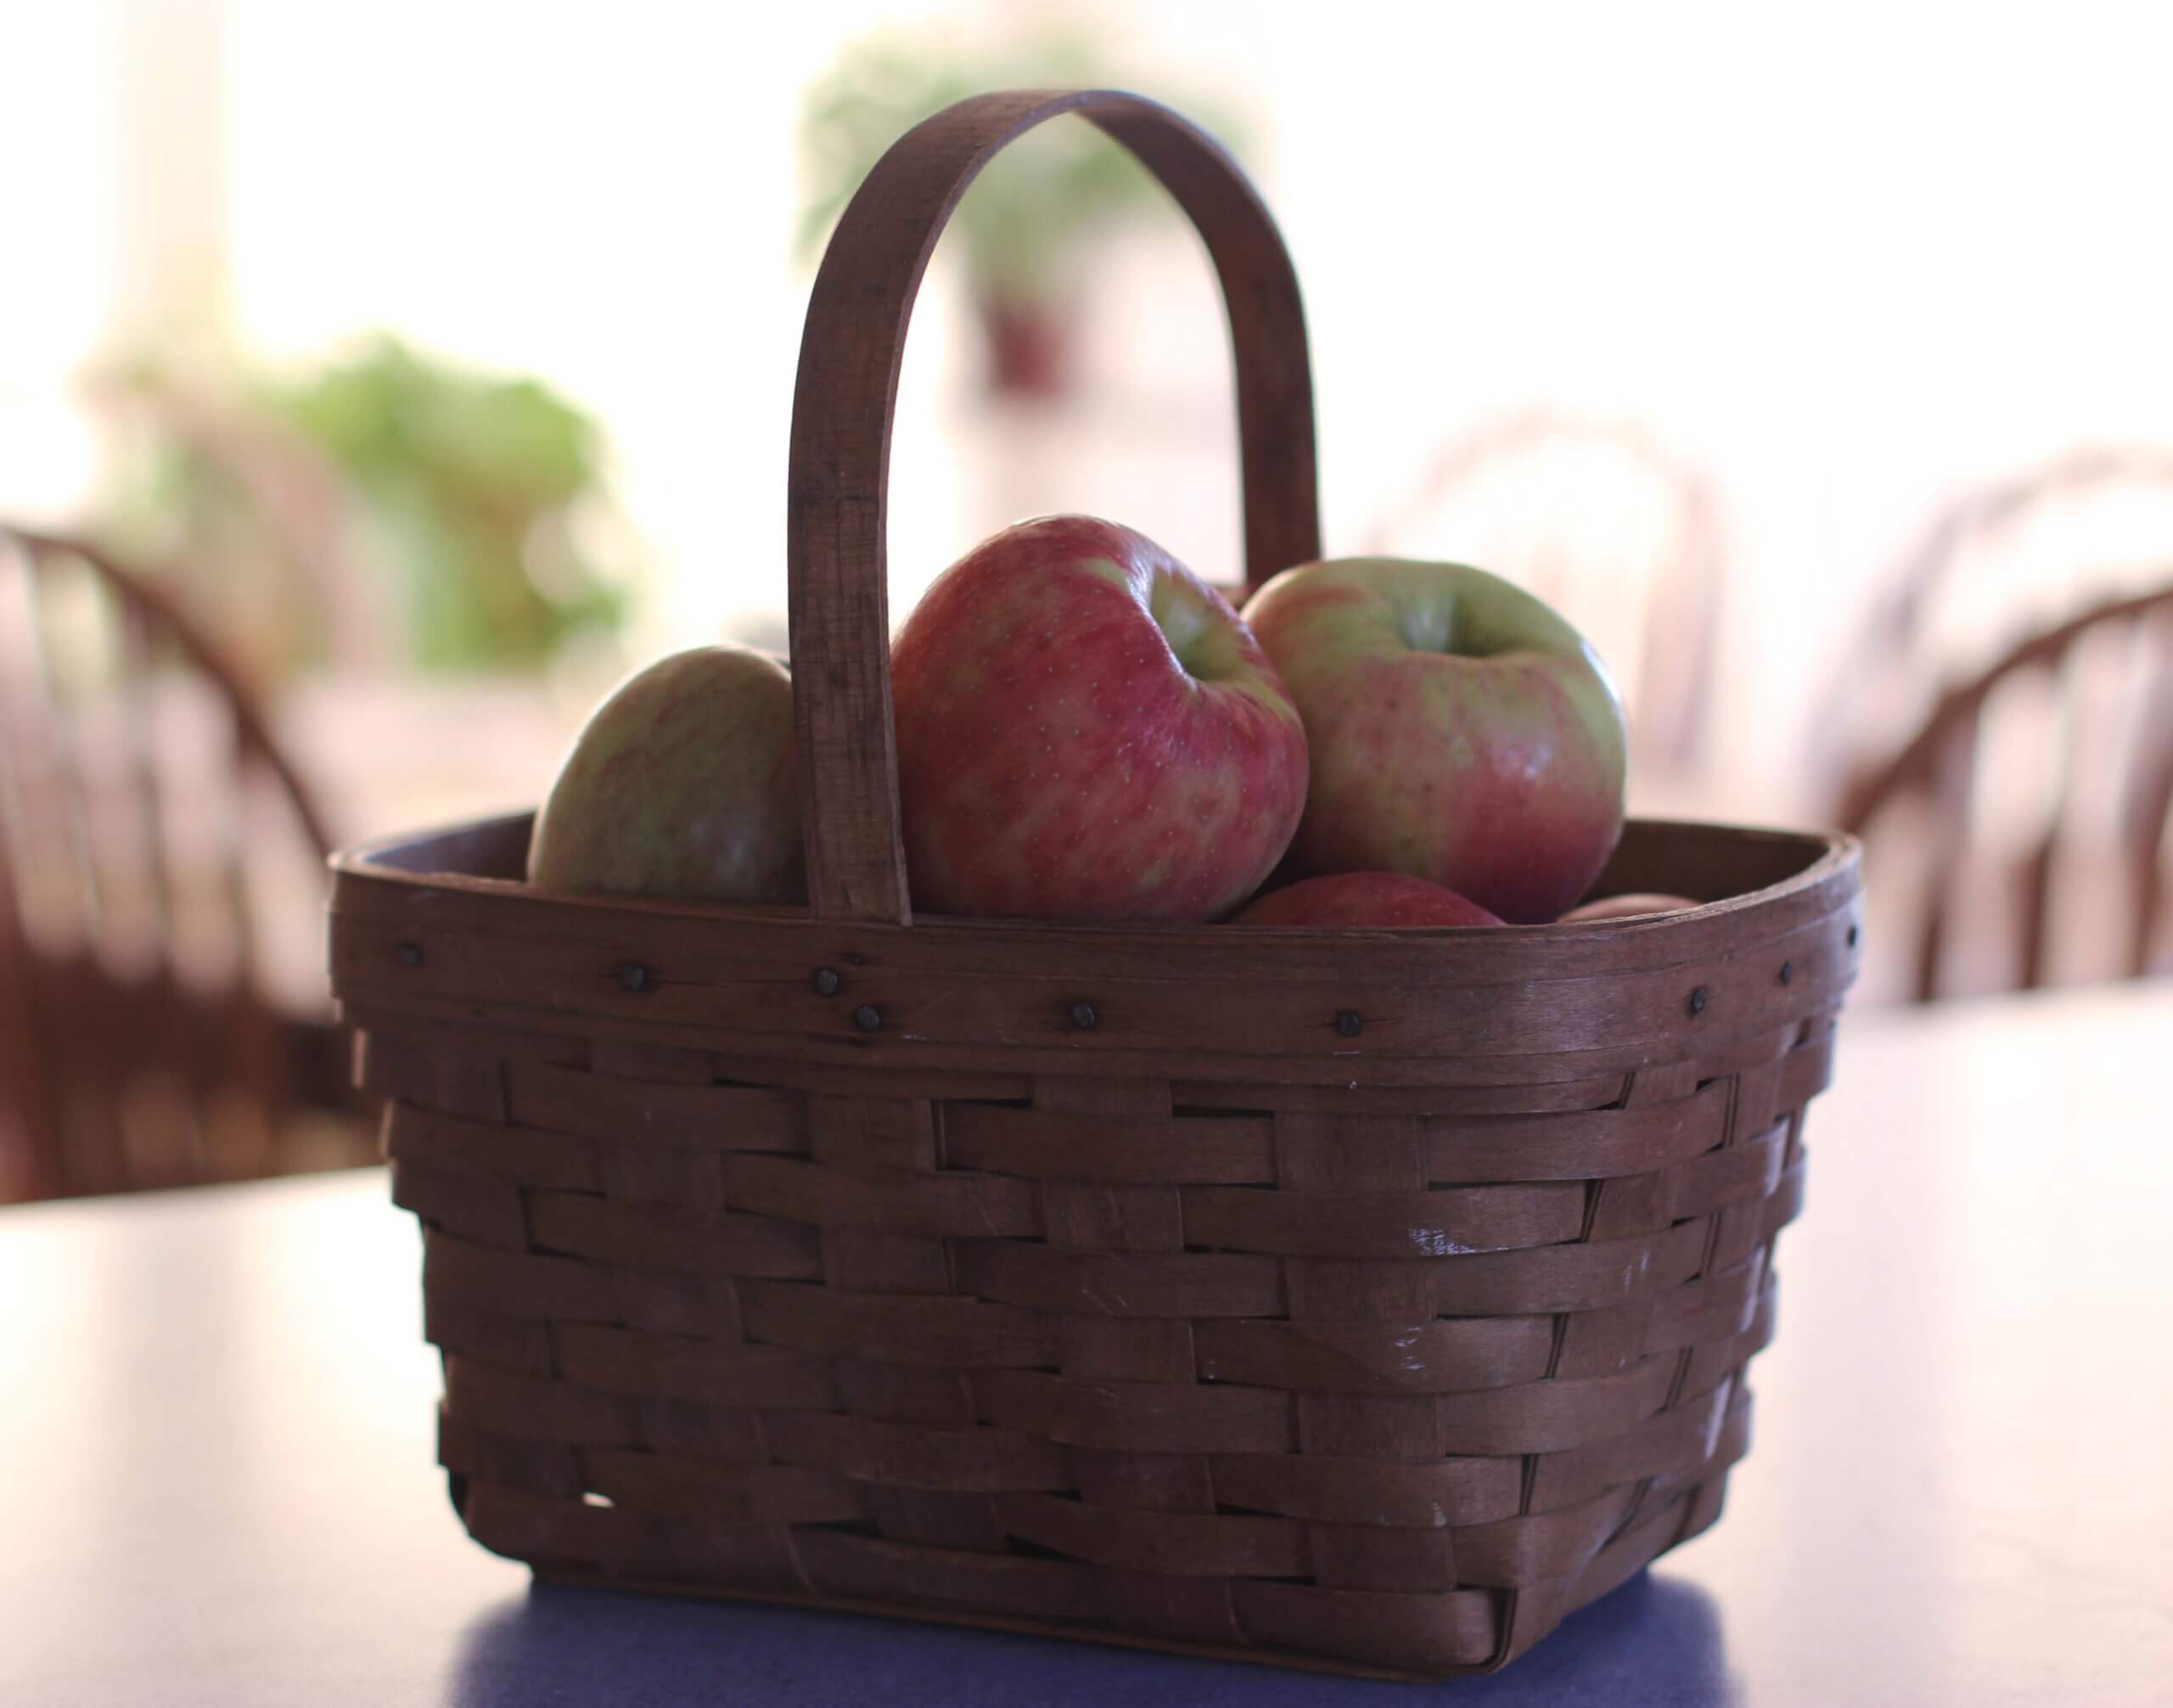 autumn-apples-cropped